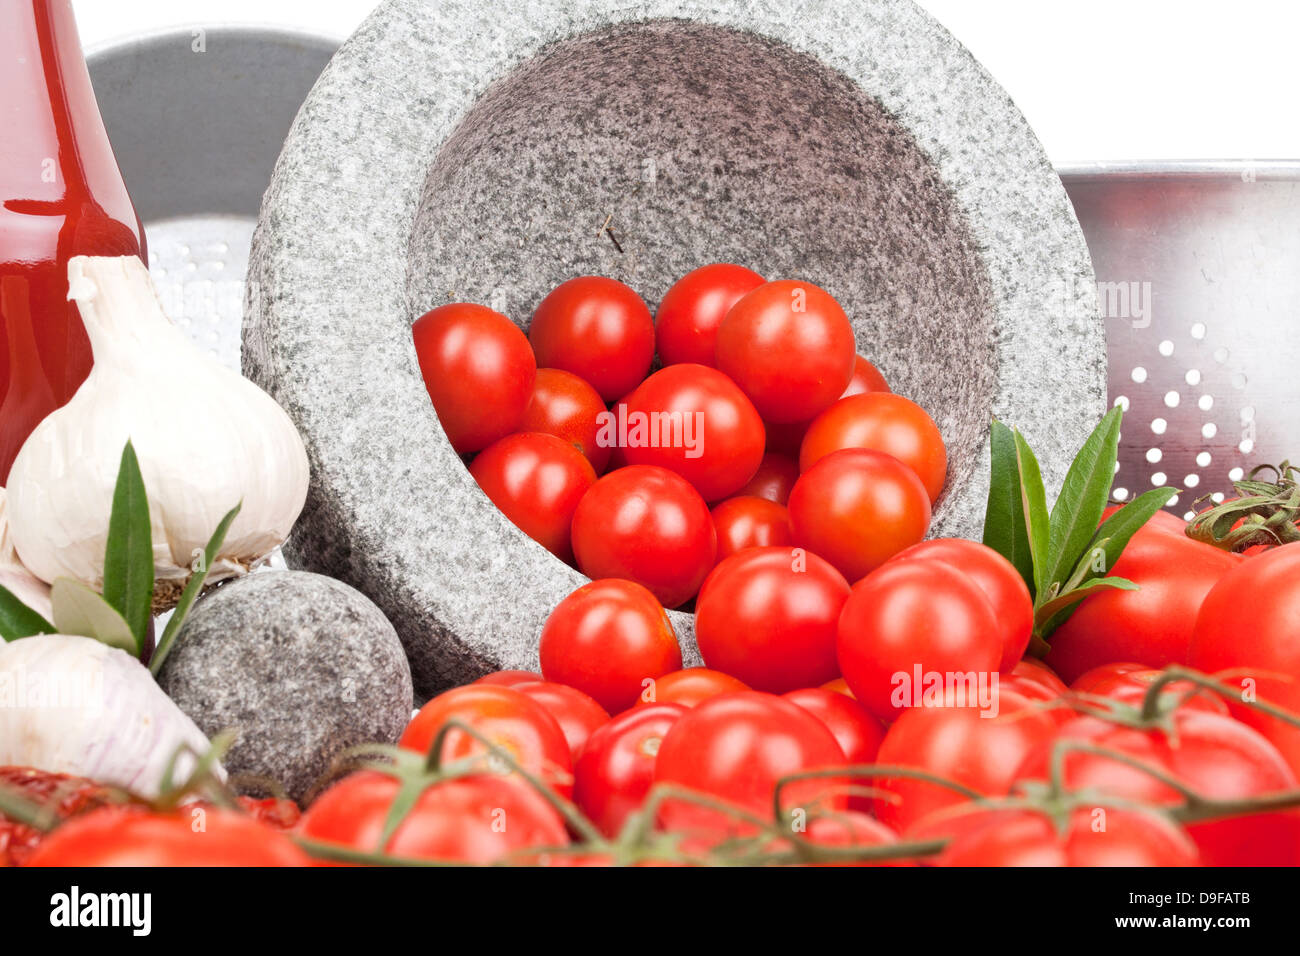 Tomatoes with garlic and Koch's utensils Tomatoes with garlic and cooking of utensil Stock Photo